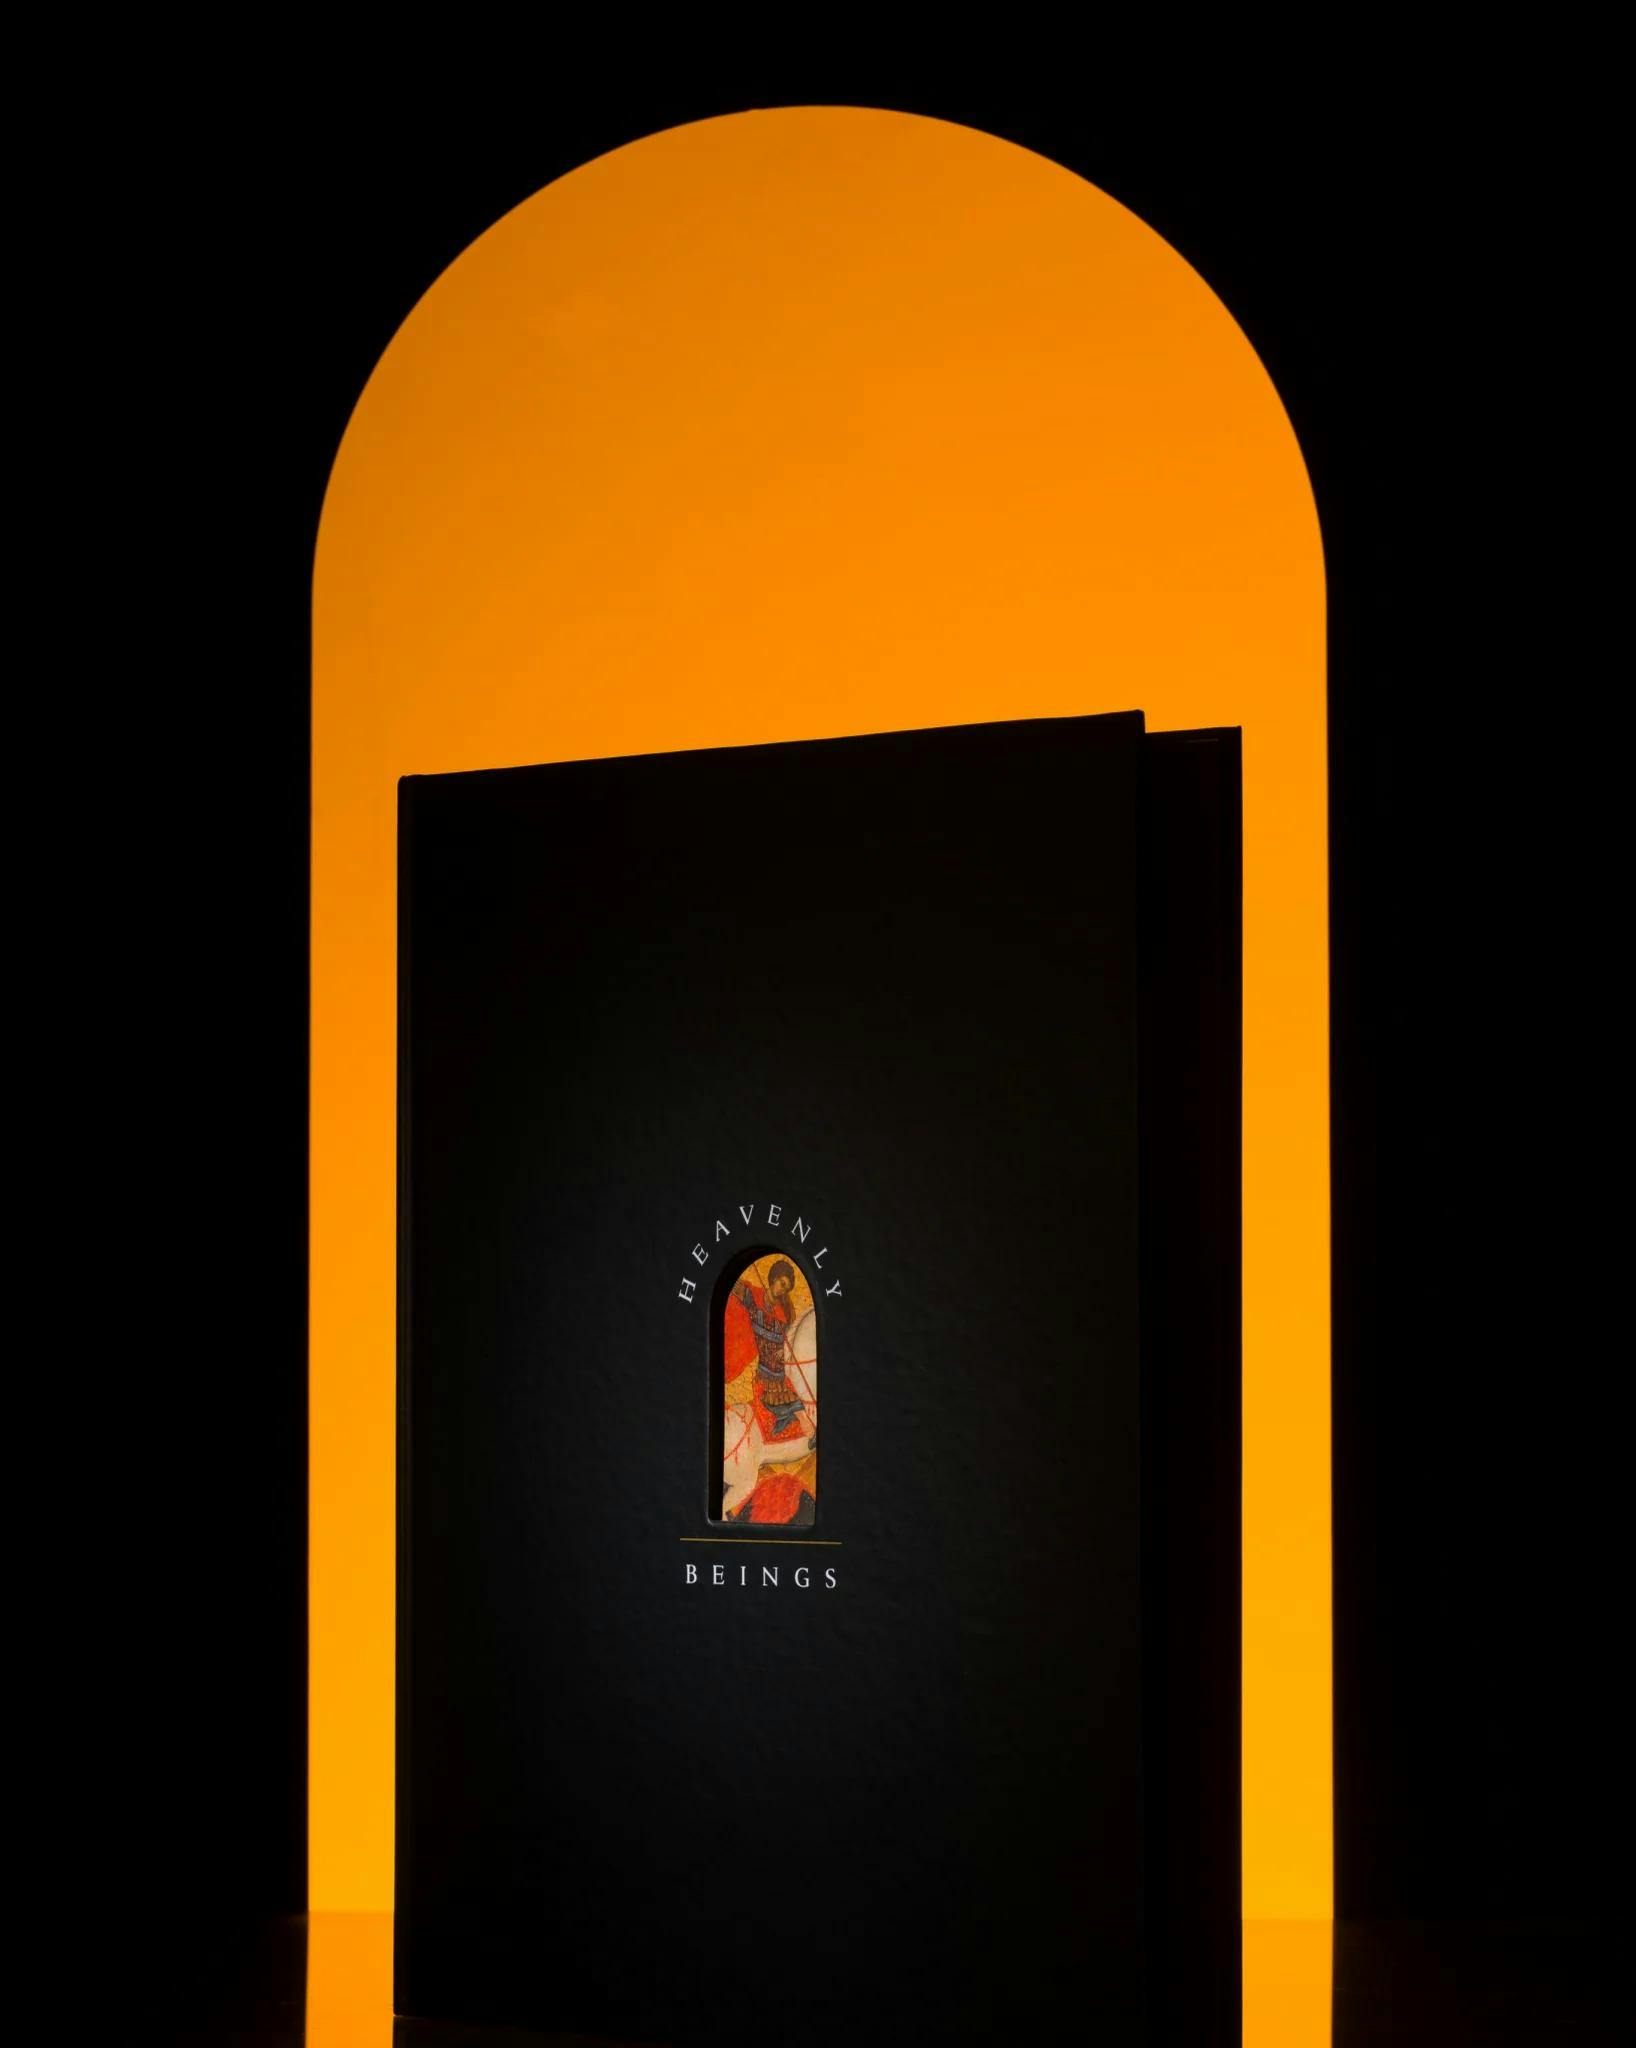 Heavenly Beings book cover on an orange and black background